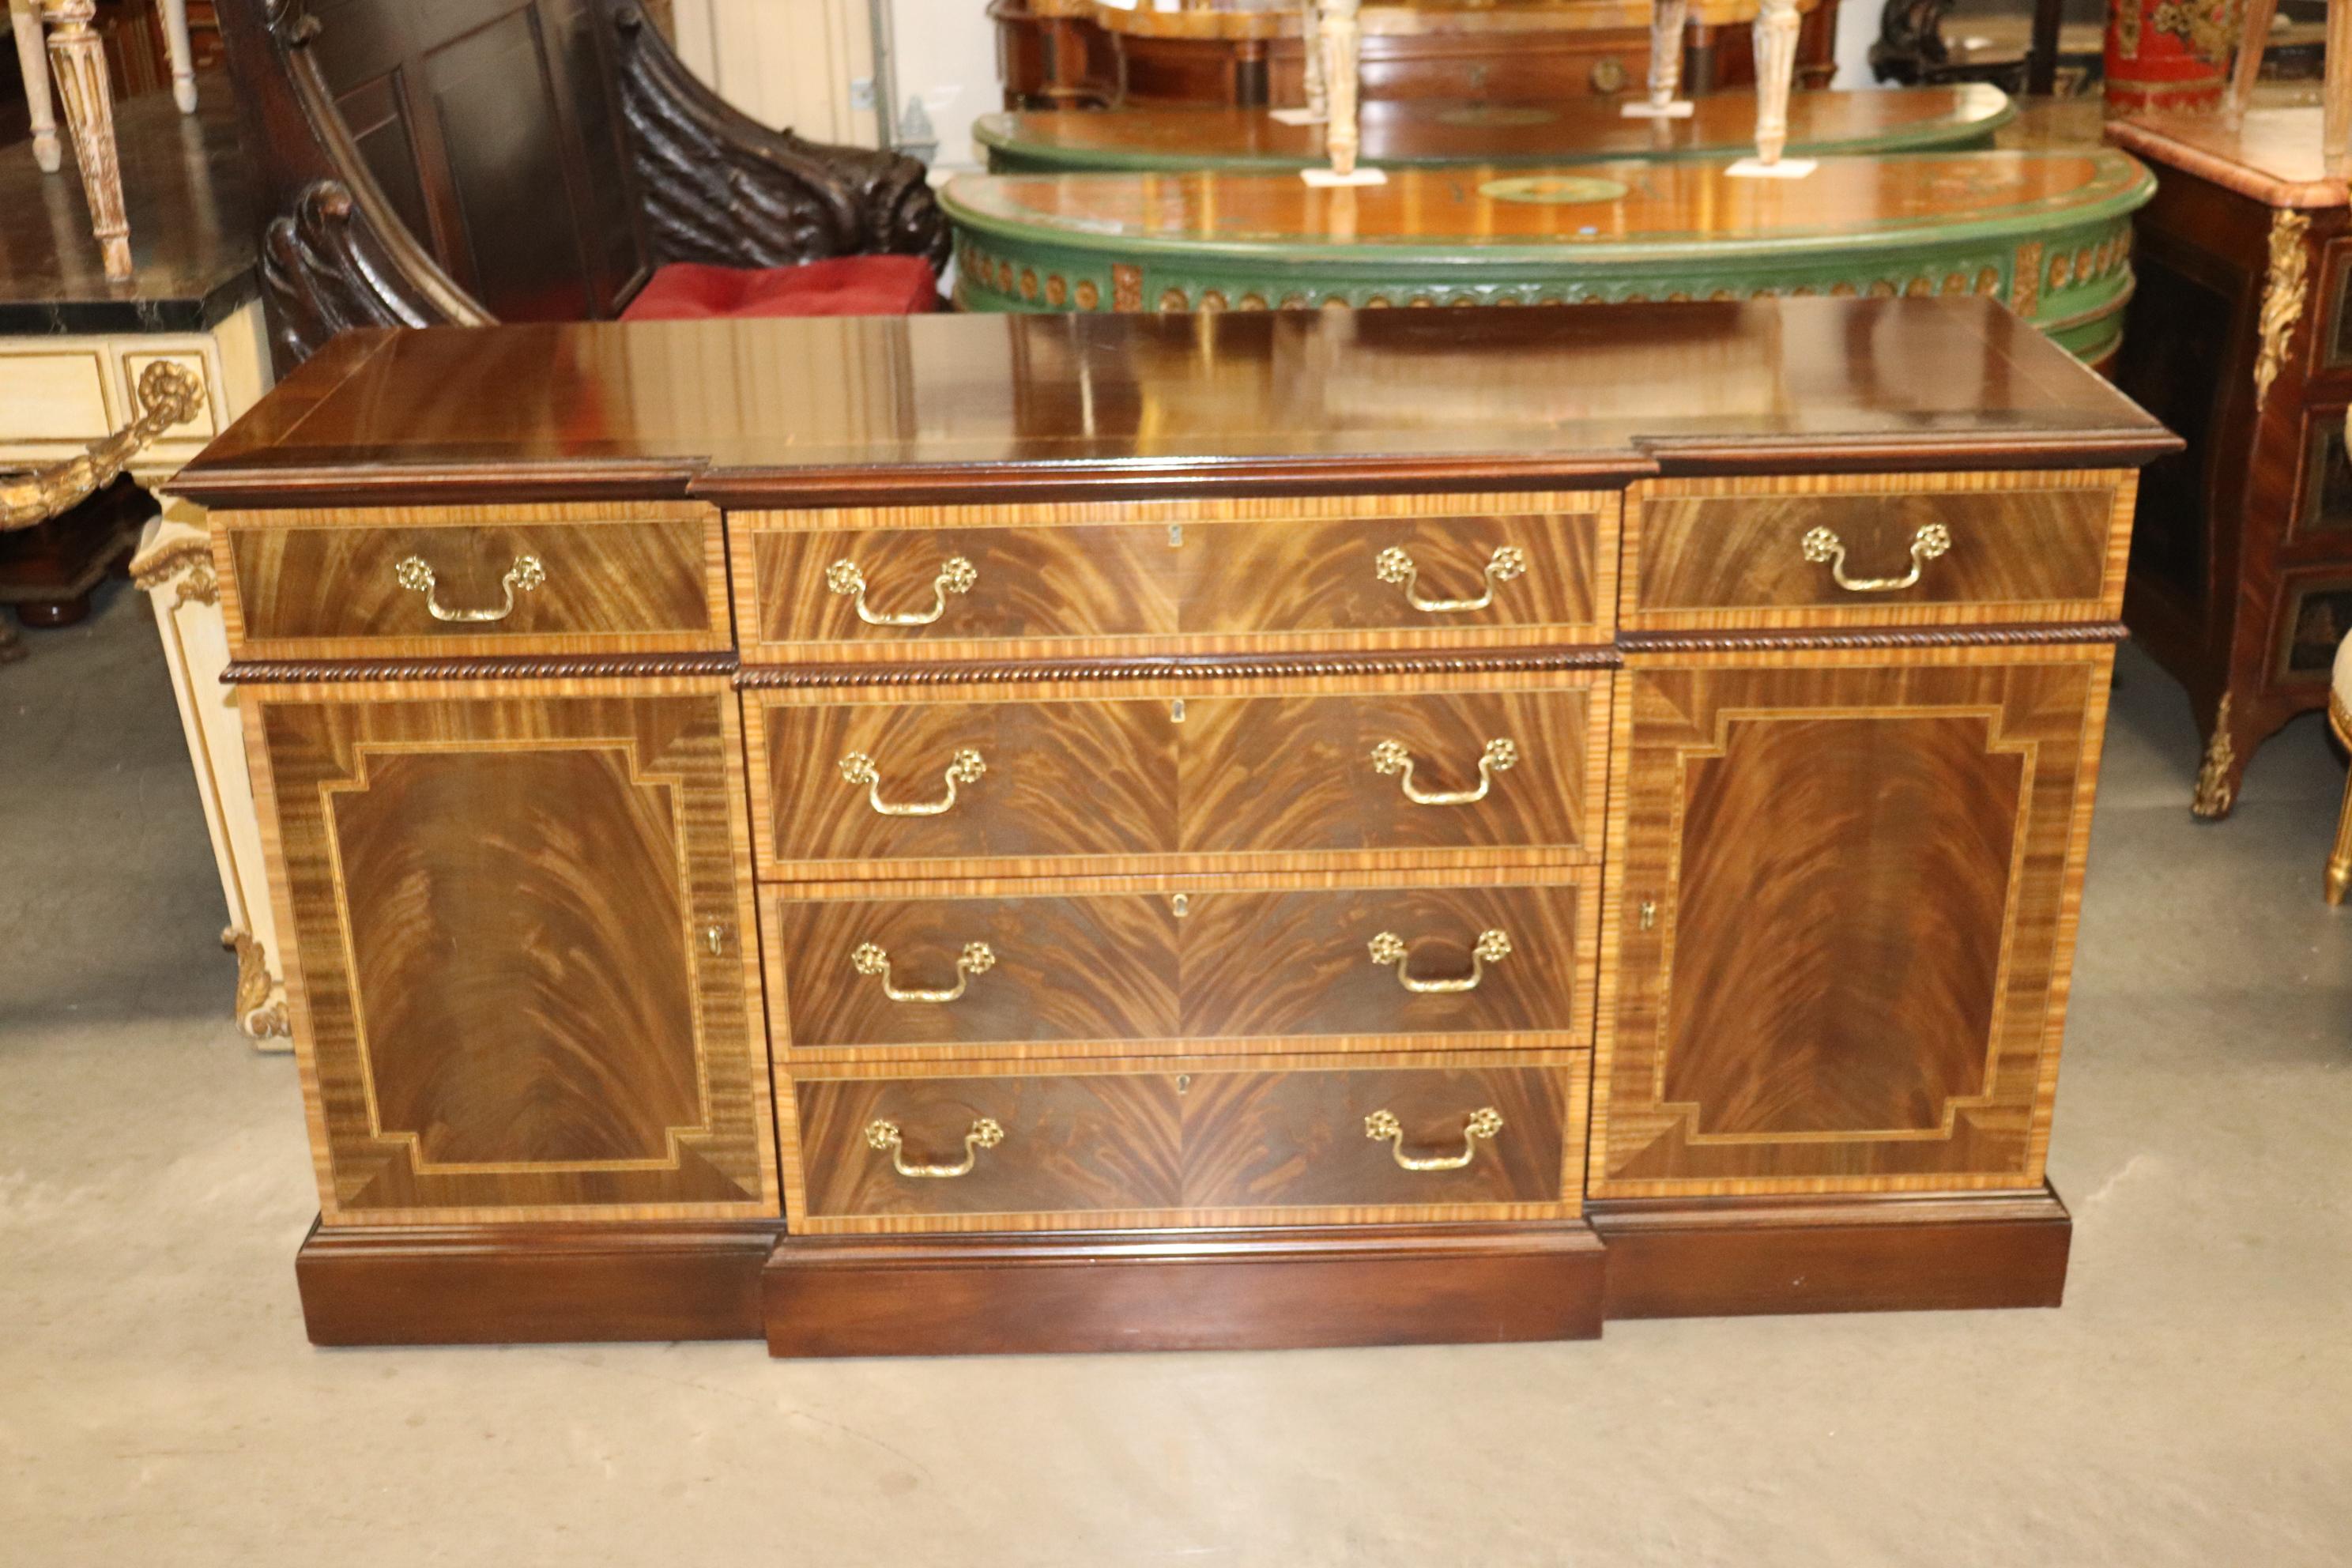 This is a beautiful flame mahogany Councill Craftsman sideboard. The sideboard is in good vintage condition.